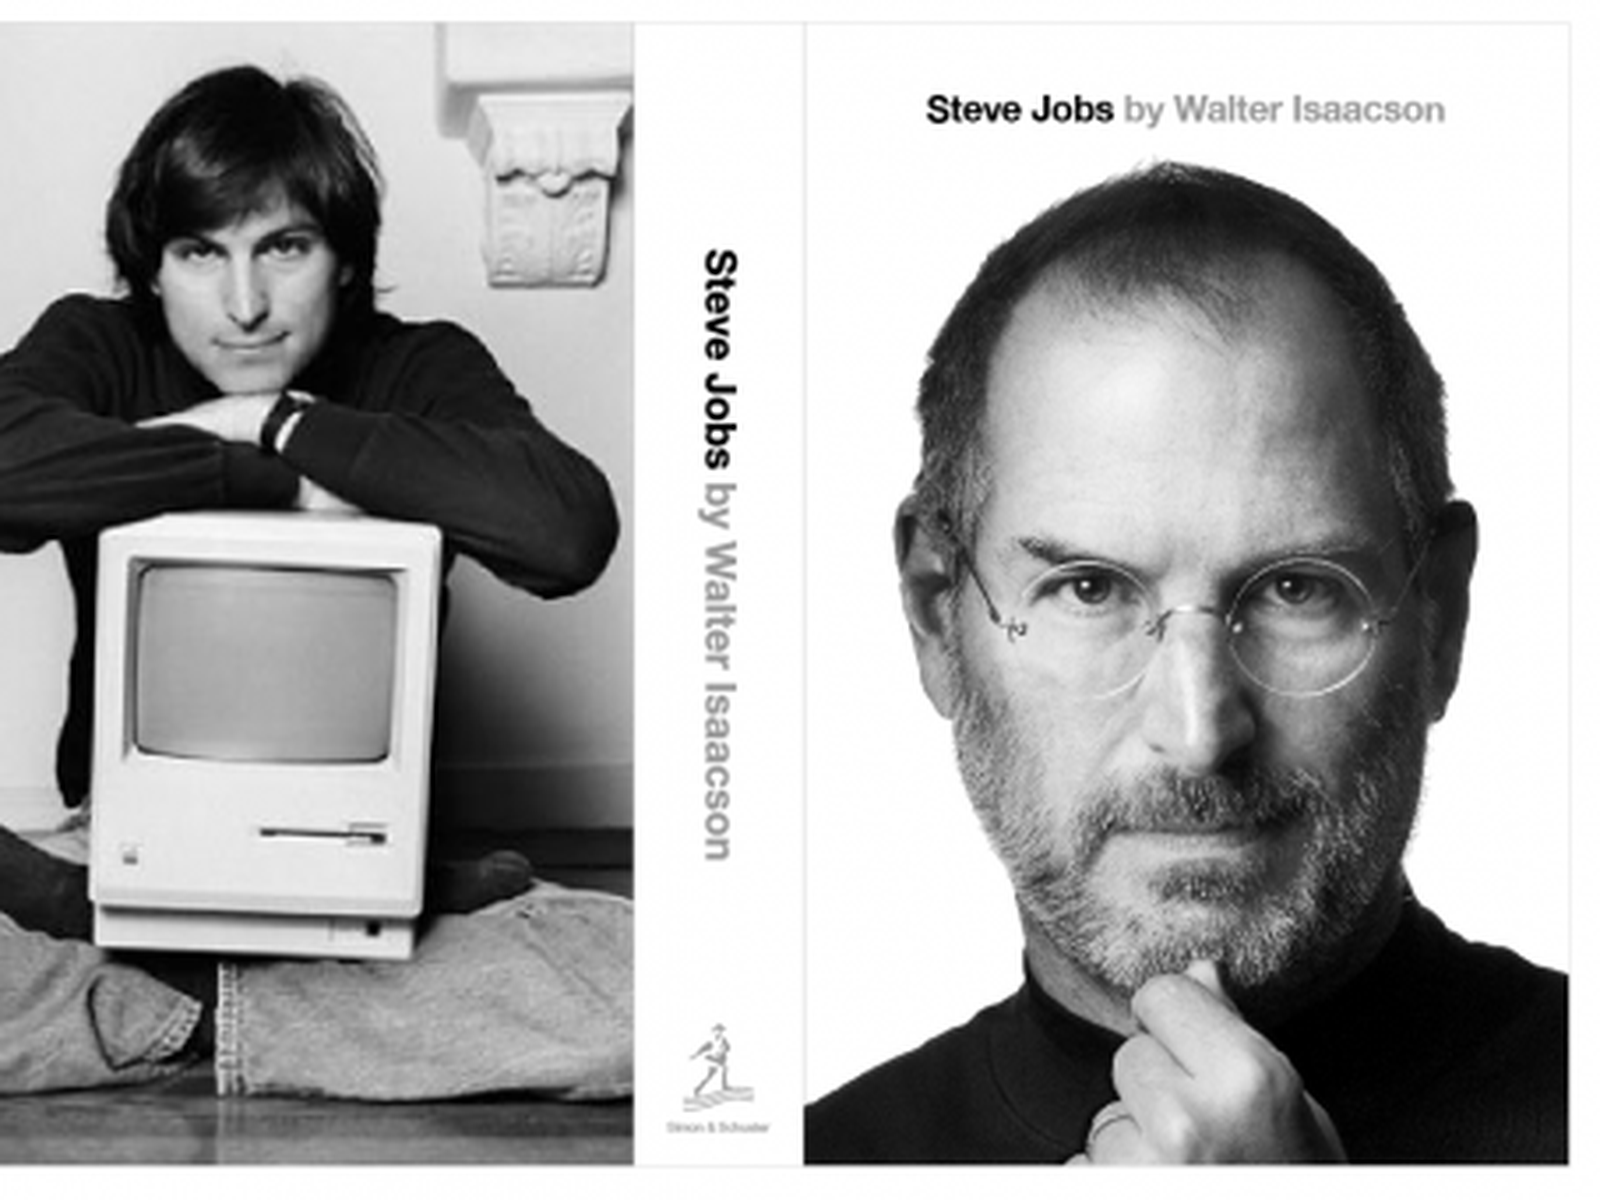 Photo of Steve Jobs' Biography Cover, Back, and Some Details - MacRumors